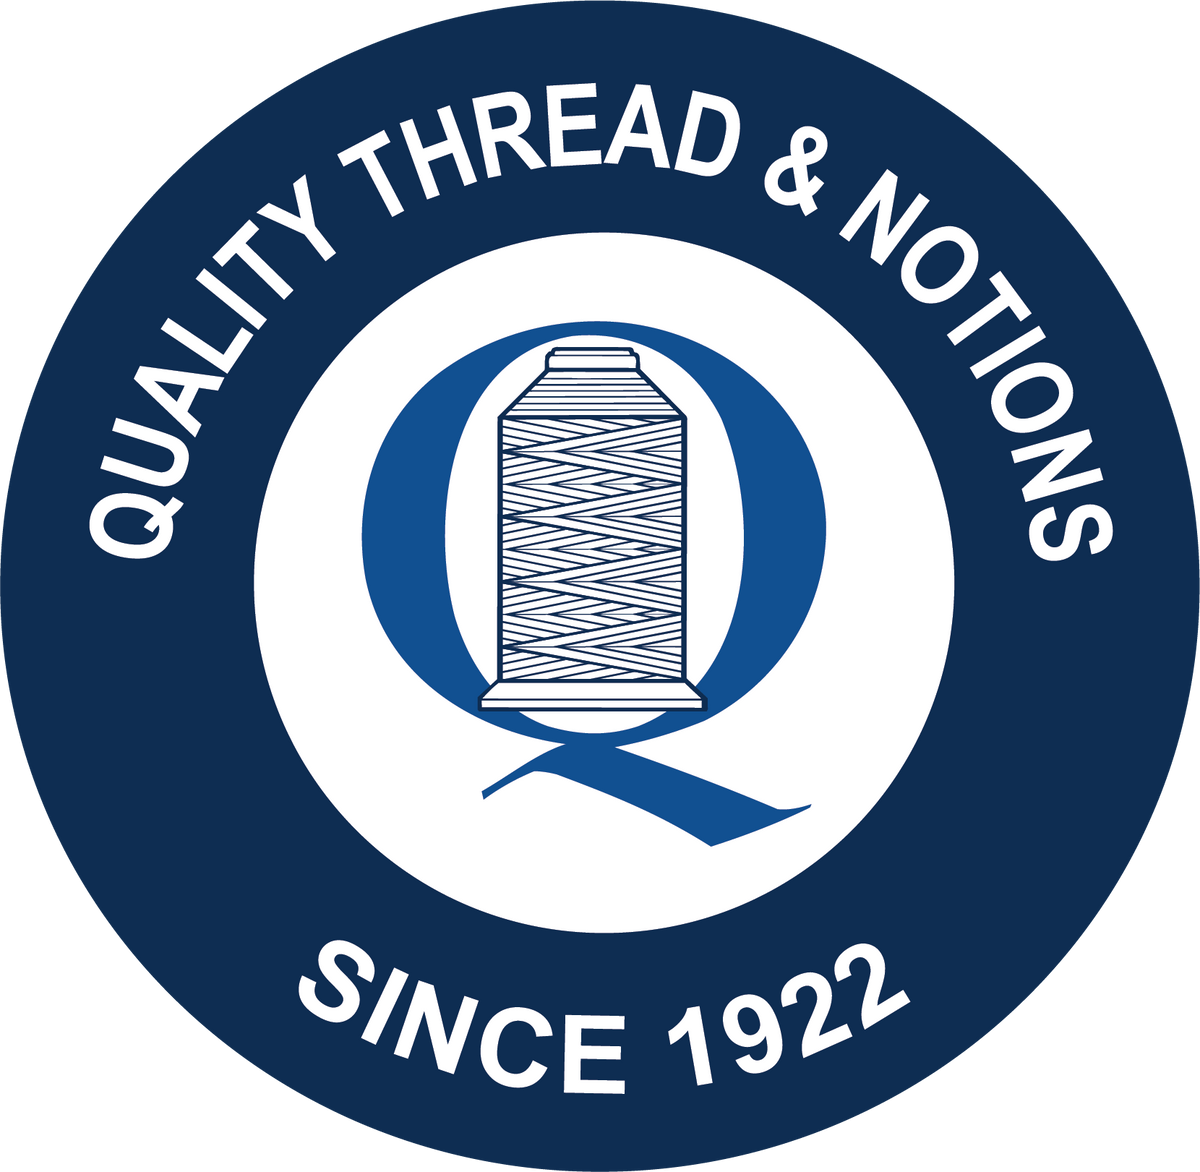 VELCRO BACK-TO-BACK  Quality Thread – Quality Thread & Notions